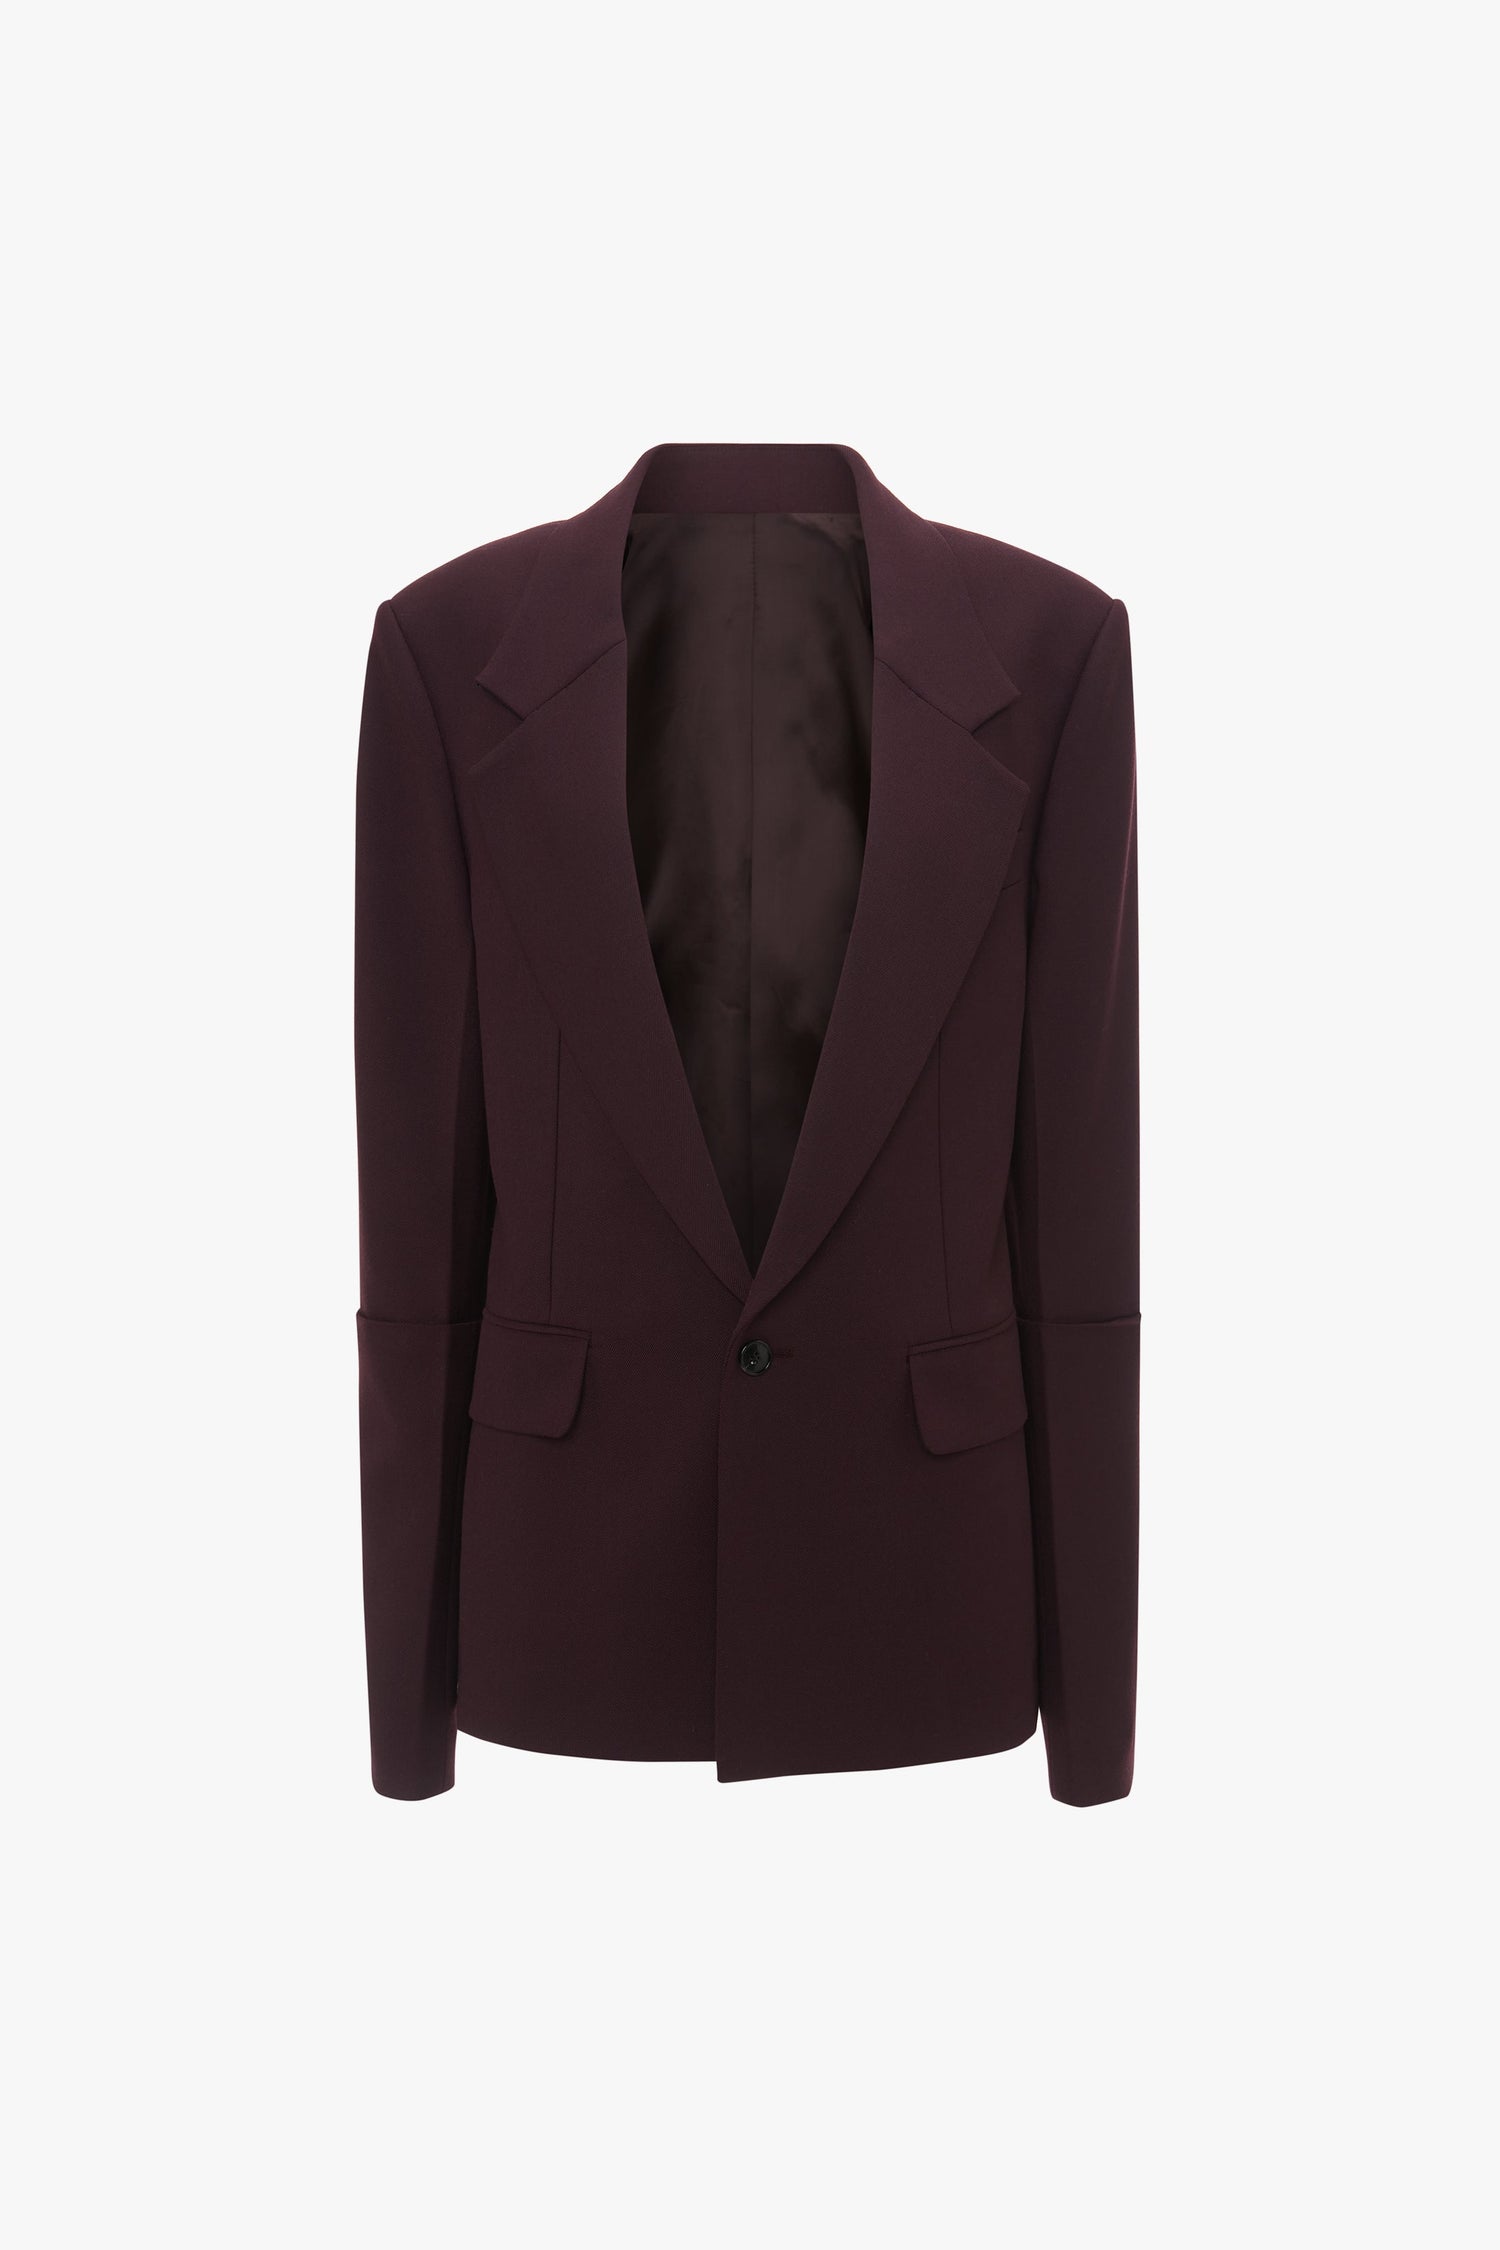 A Sleeve Detail Patch Pocket Jacket In Deep Mahogany with a single button closure, notched lapels, and long sleeves is displayed against a white background. Crafted from recycled wool, this Victoria Beckham contemporary flair jacket adds a modern touch to any ensemble.